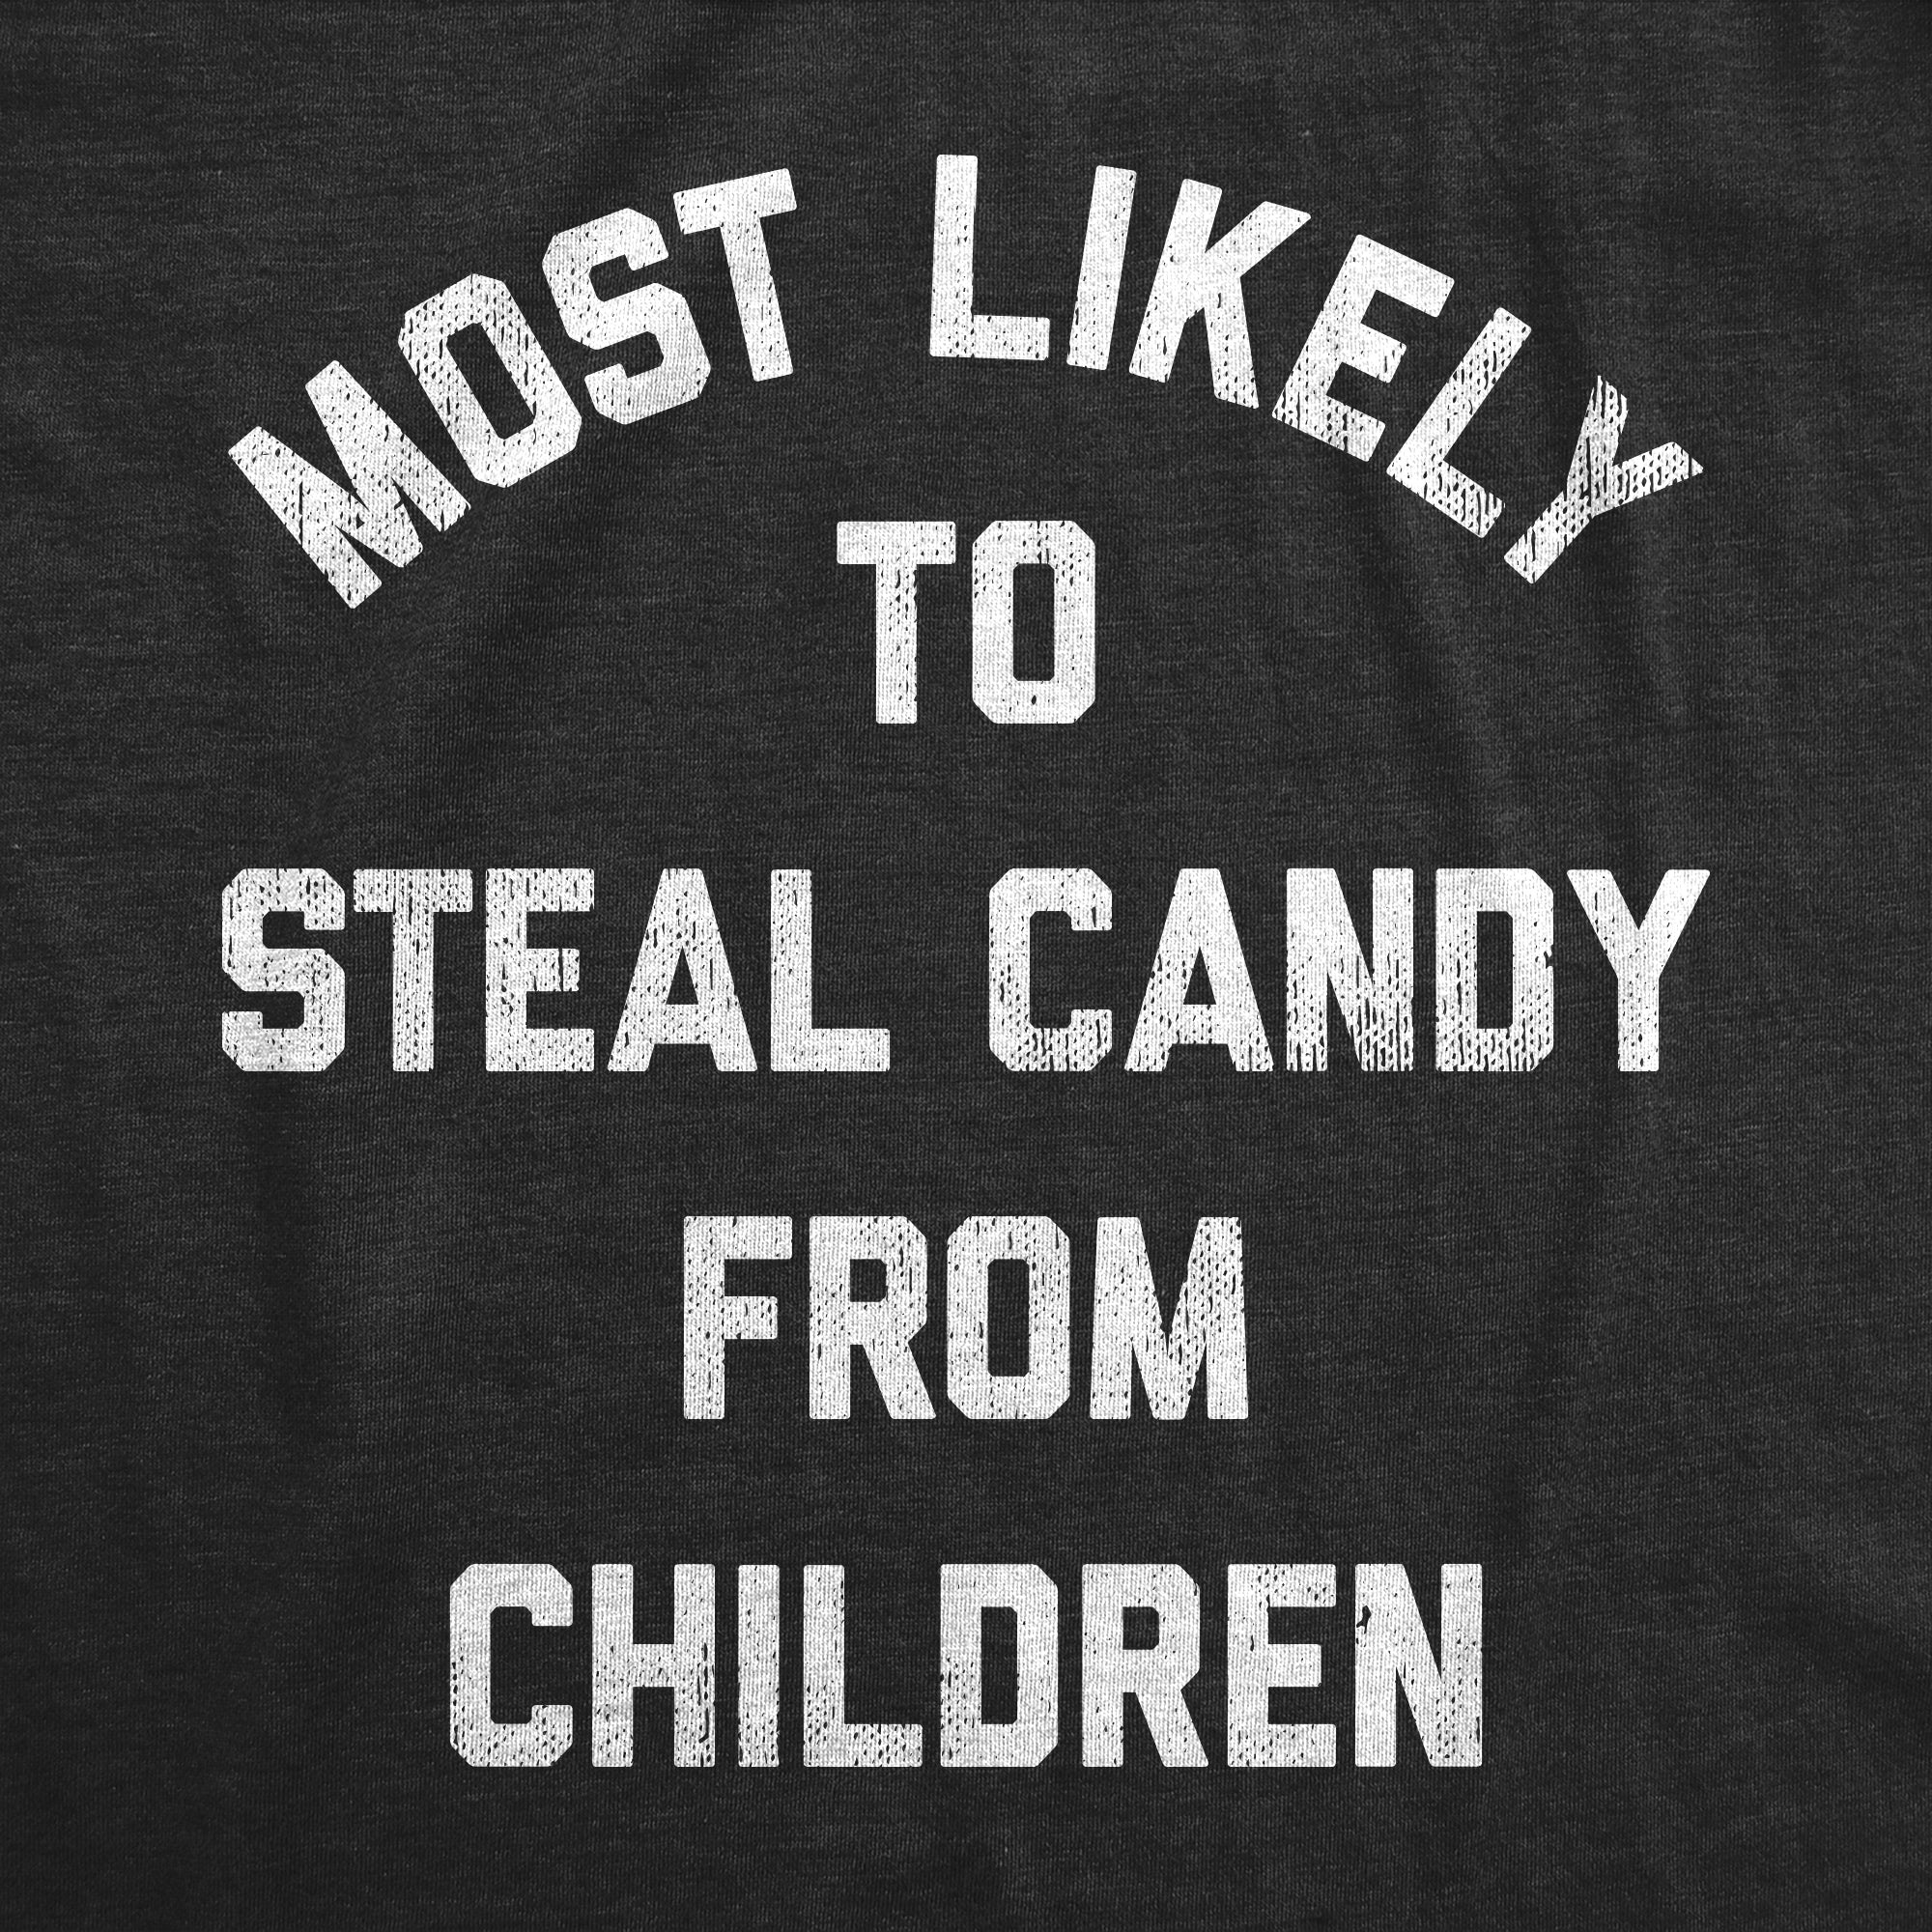 Funny Heather Black - CANDY Most Likely To Steal Candy From Children Womens T Shirt Nerdy Halloween Sarcastic Tee